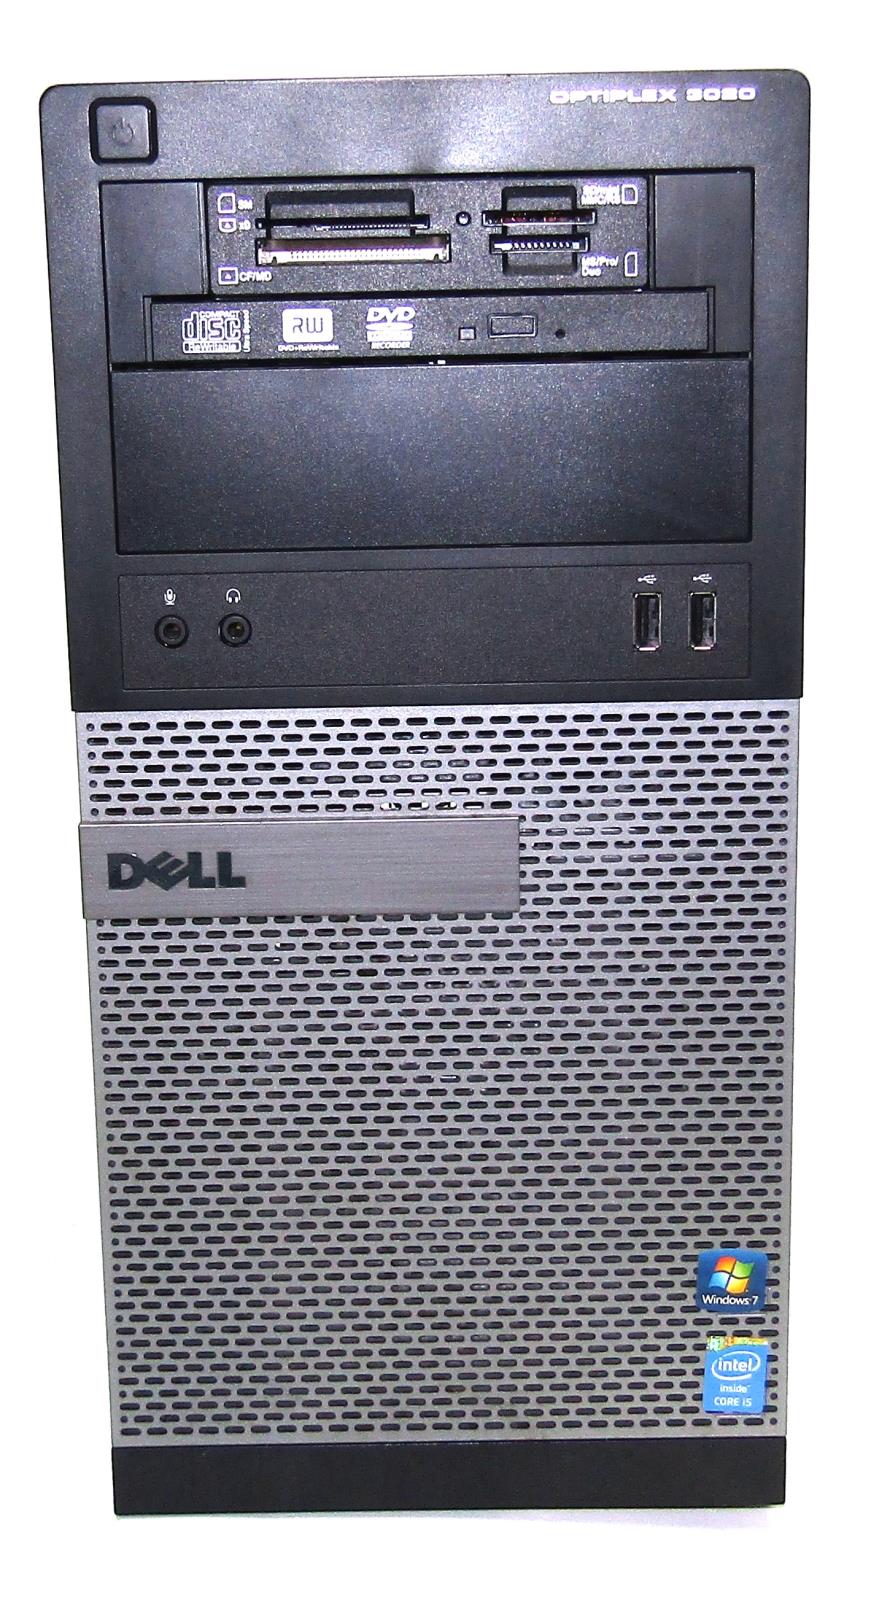 Support For Optiplex 3020 Drivers  Downloads Dell Us